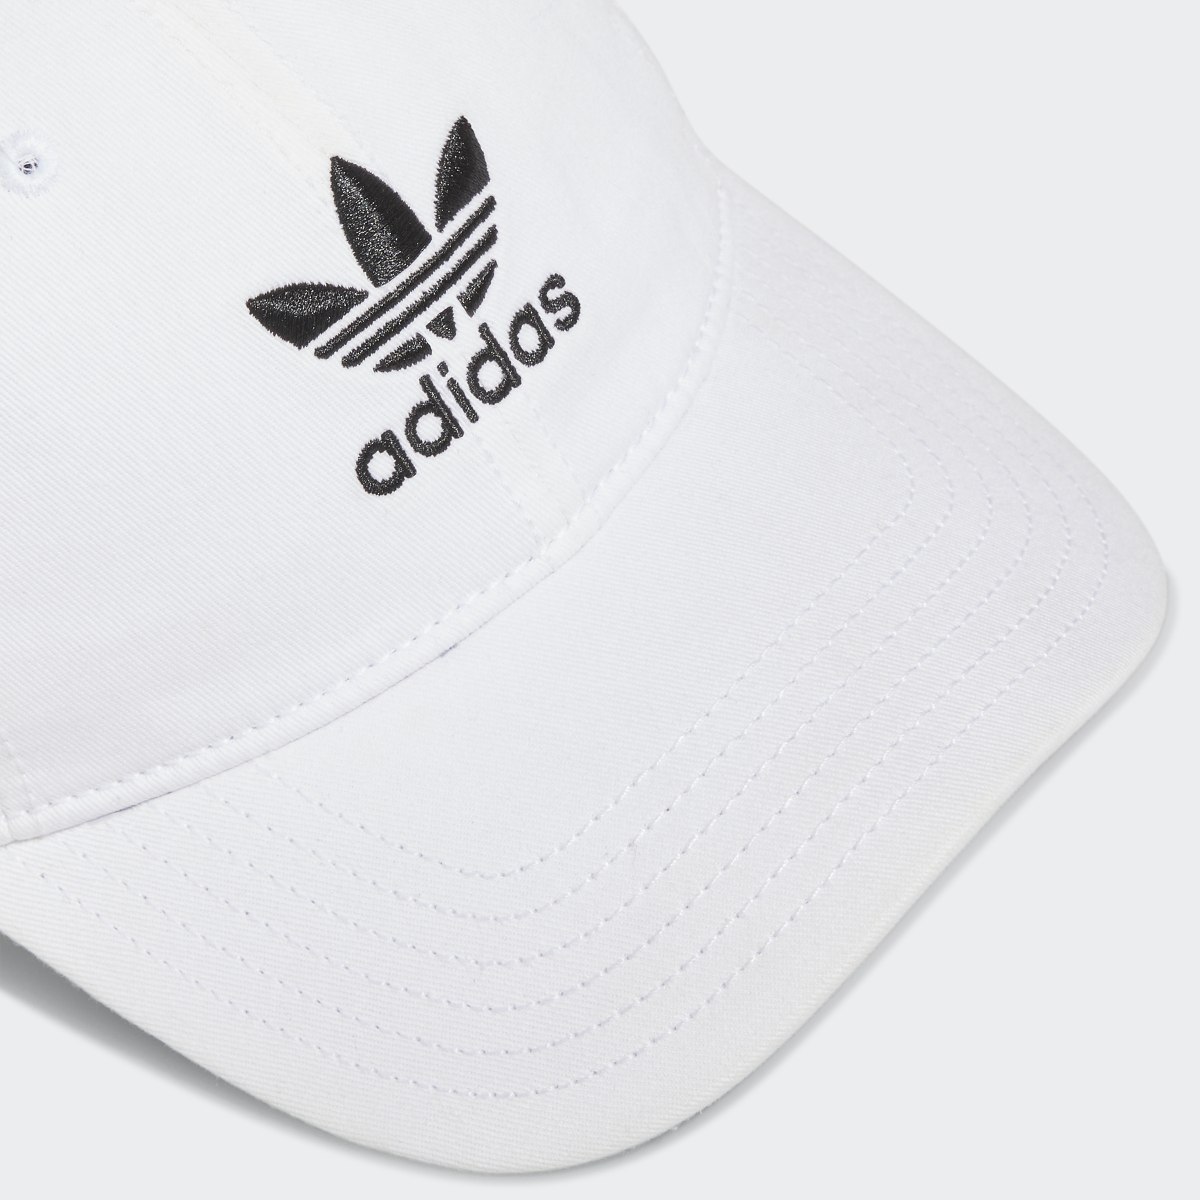 Adidas Relaxed Strap-Back Hat. 7